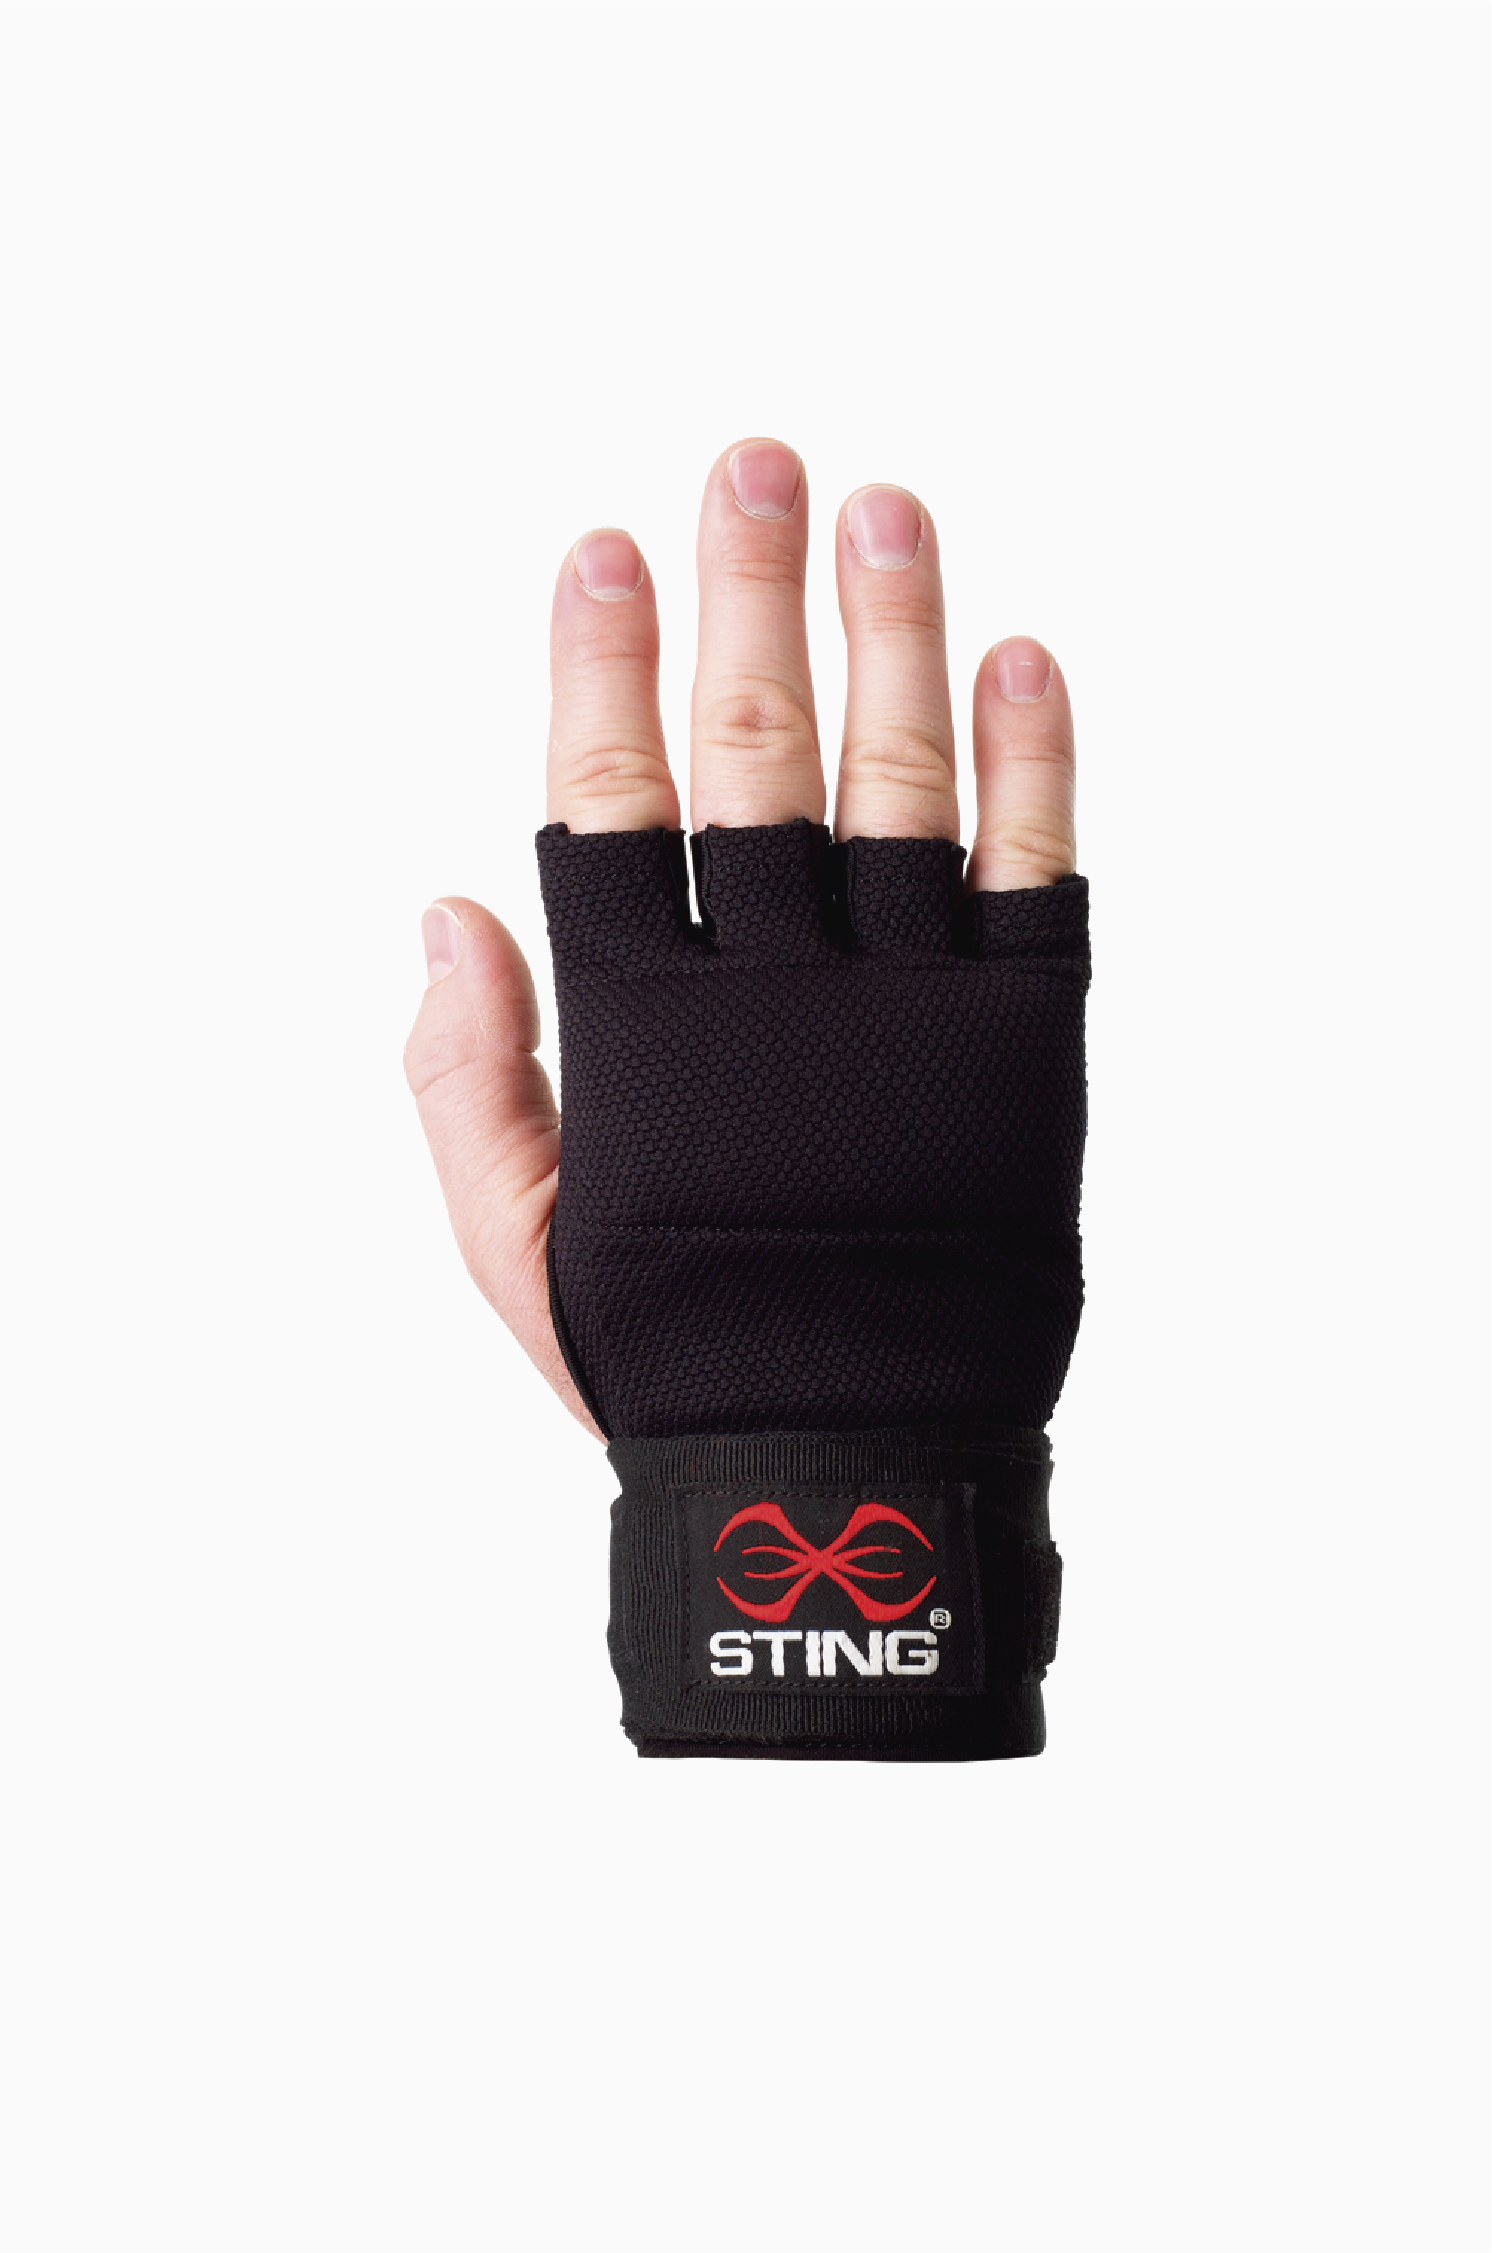 Sting Boxing Elasticised Hand Wraps Boxing Protection